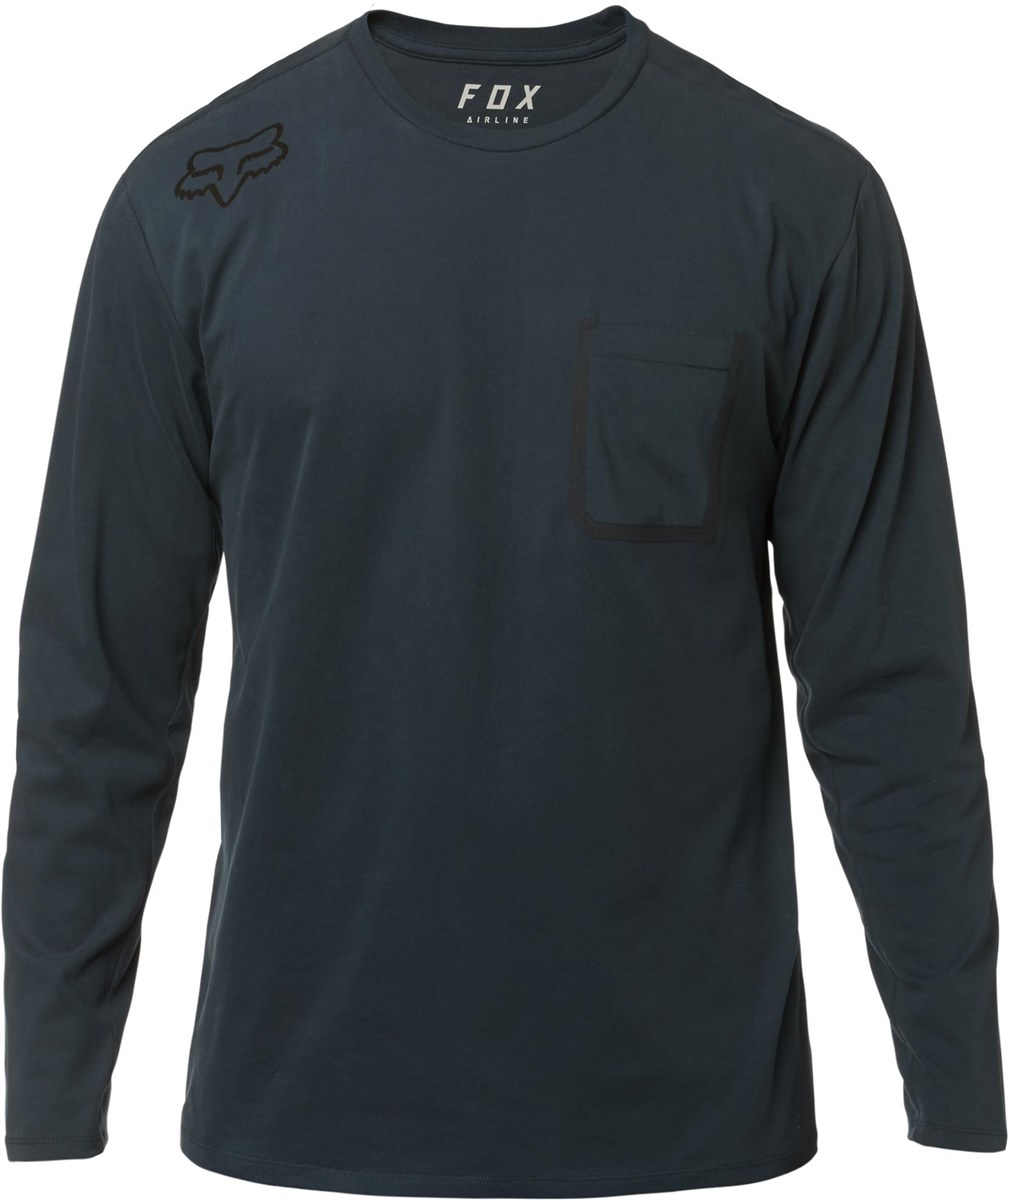 Fox Clothing Redplate 360 Airline Long Sleeve Tee product image